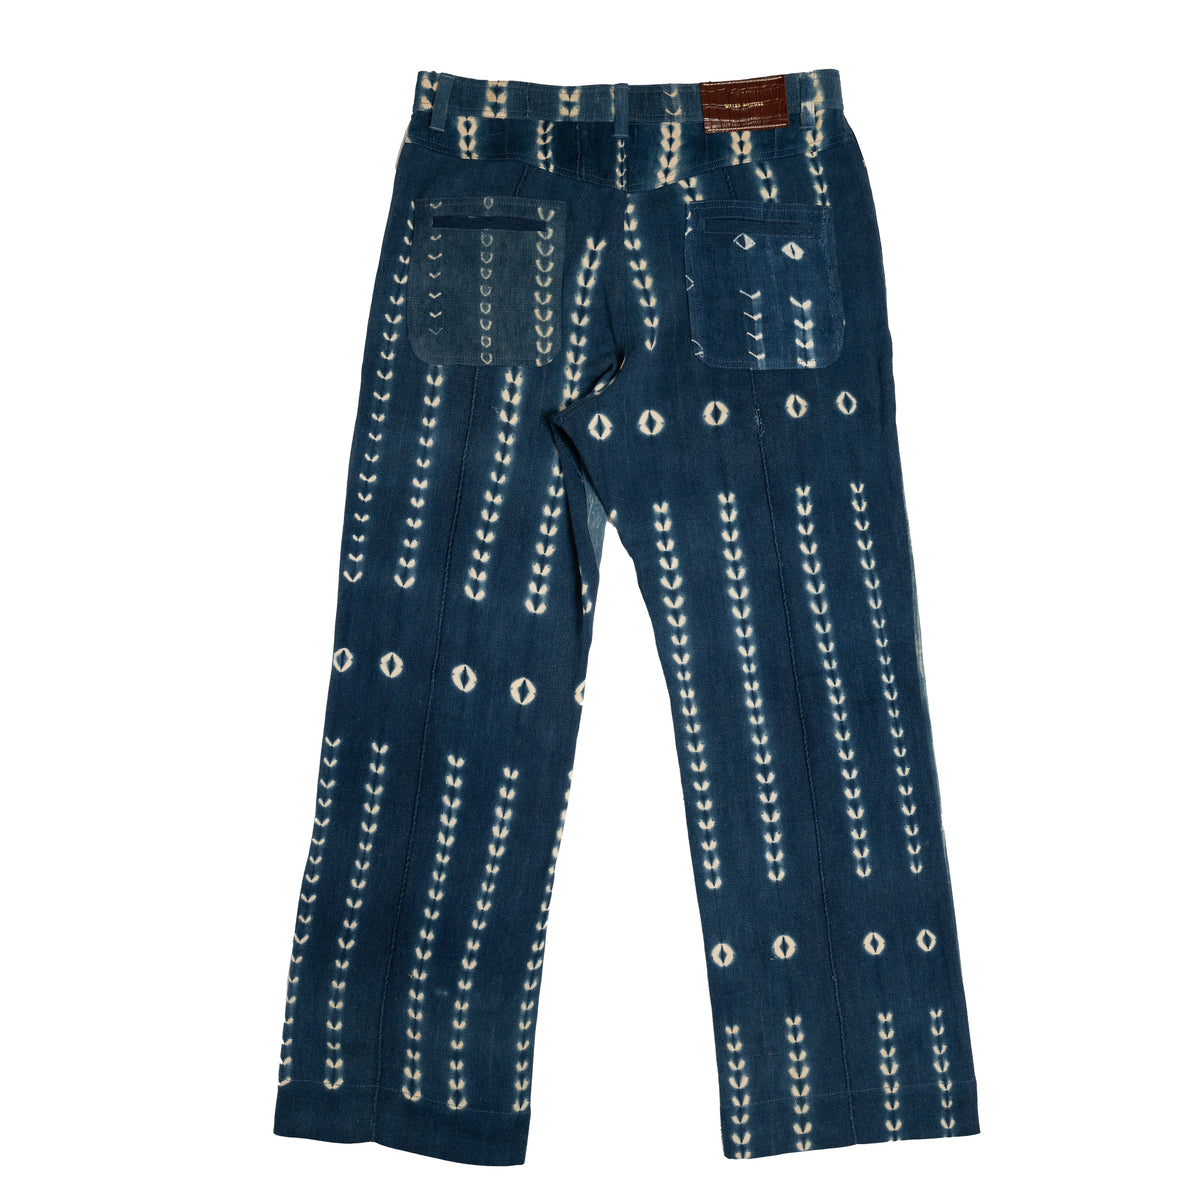 Dub Contrast waistband jeans in blue - Wales Bonner